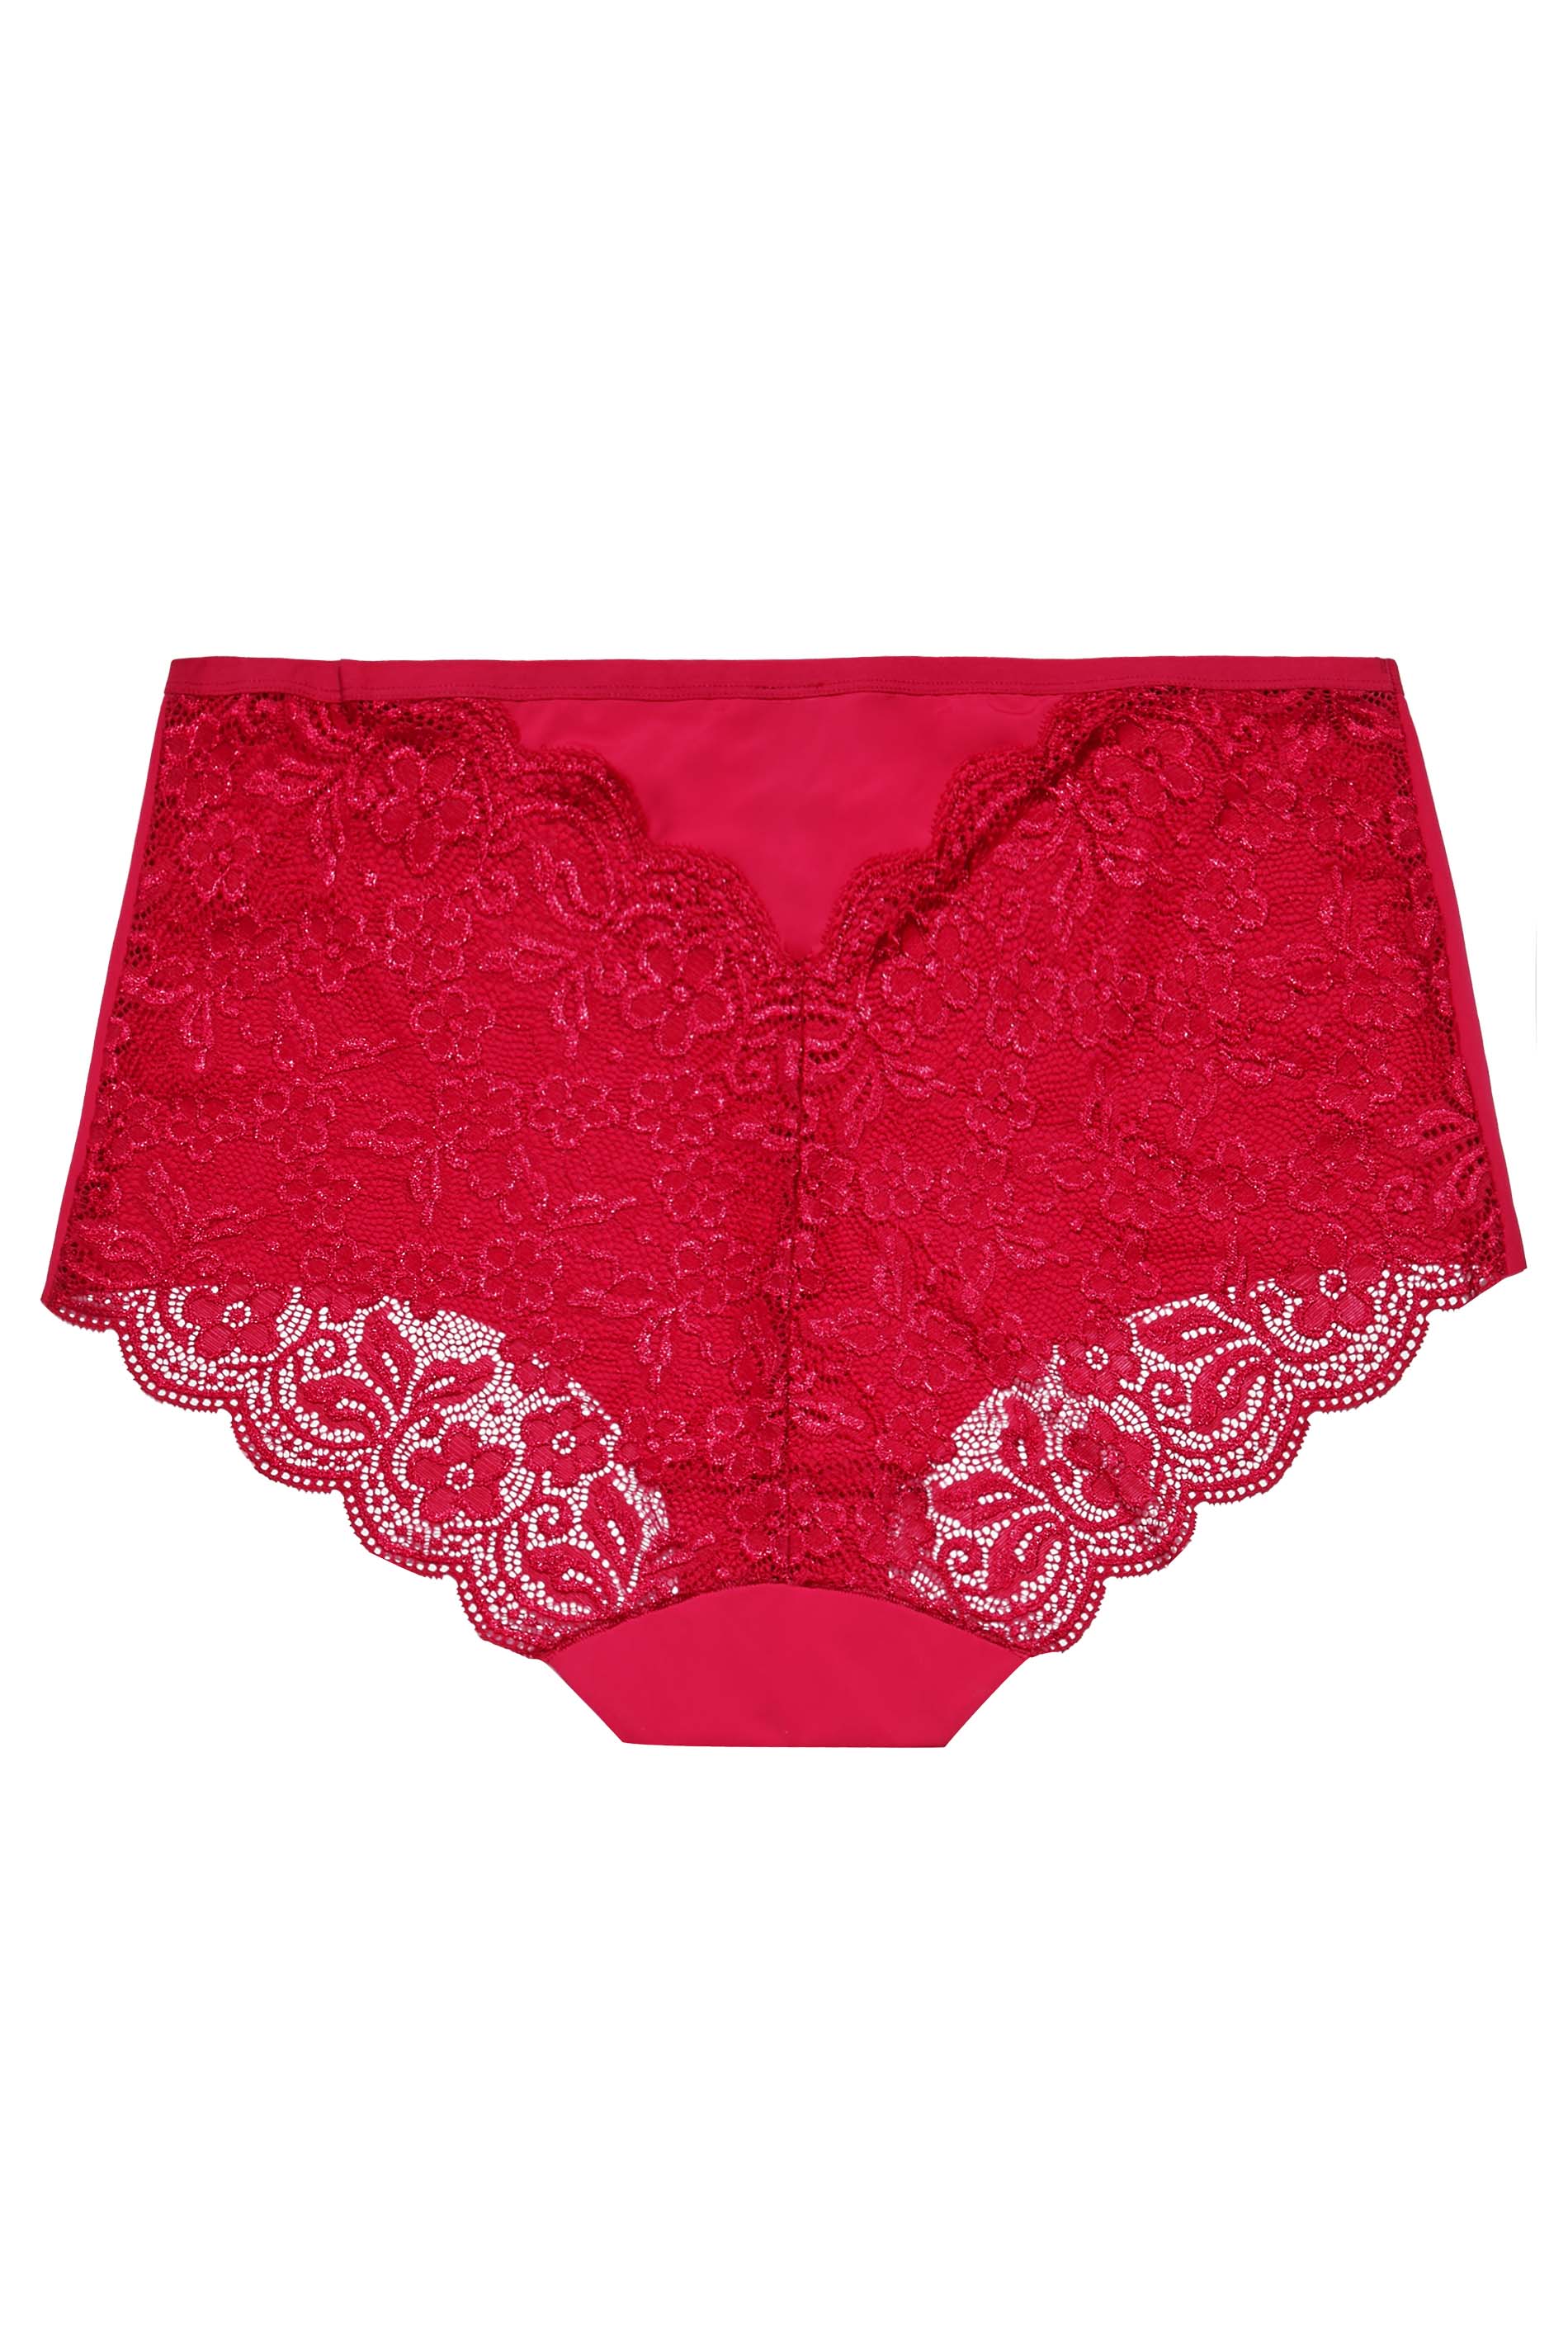 3 PACK Plus Size Red & Black Lace Back High Waisted Knickers | Yours ...